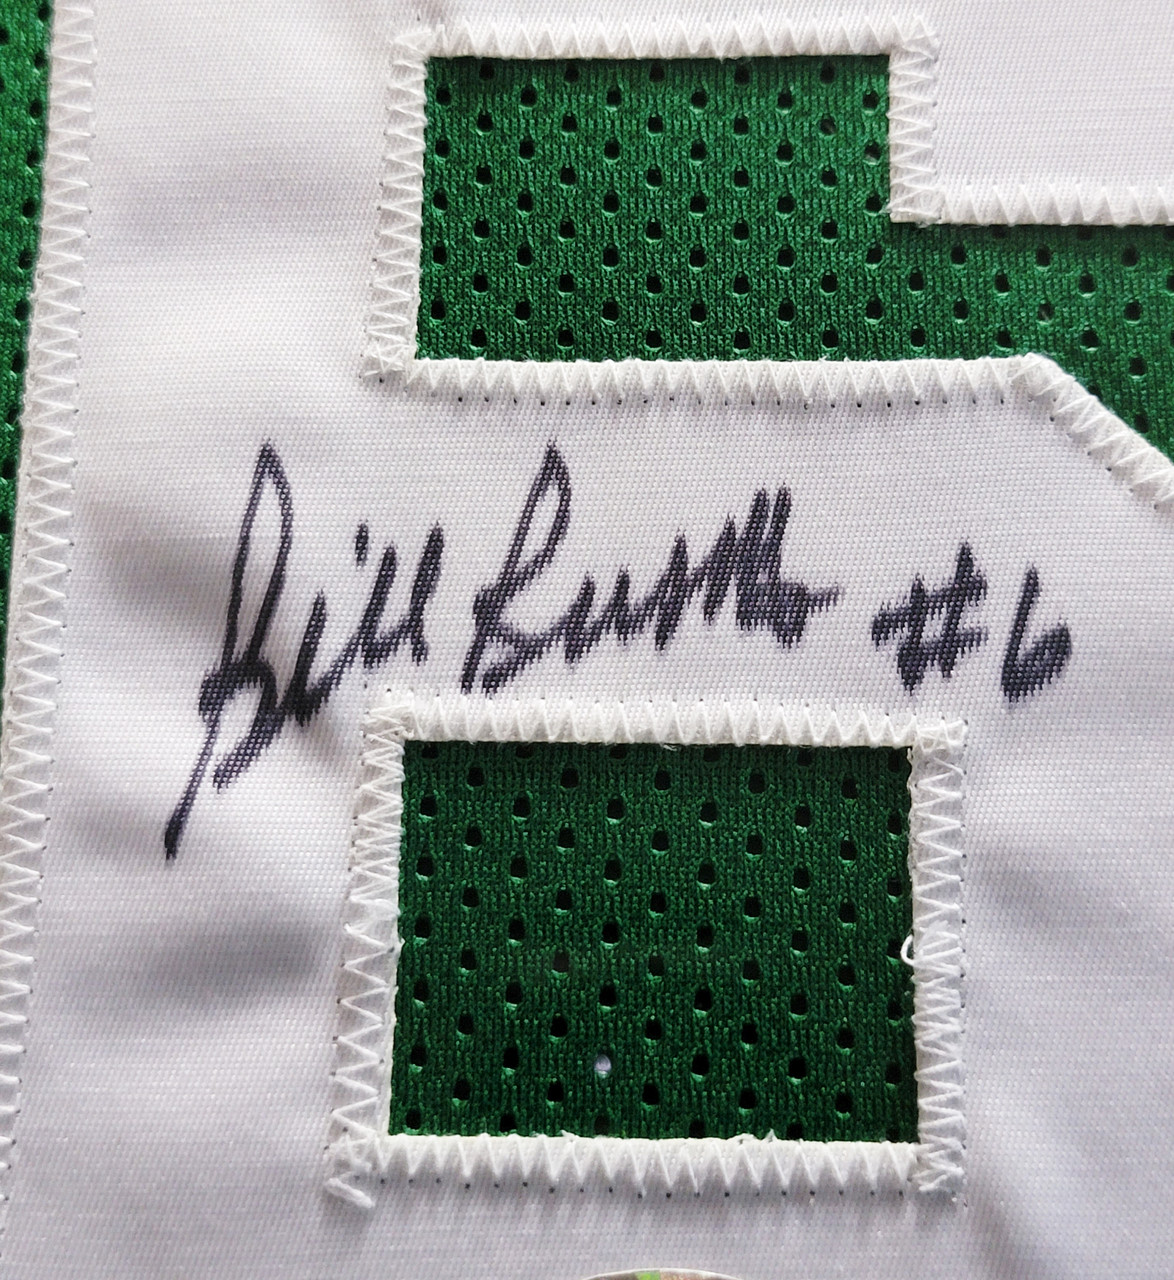 Bill Russell Boston Celtics Signed Autograph Custom Jersey Back Signed  BRussell Hologram Certified at 's Sports Collectibles Store